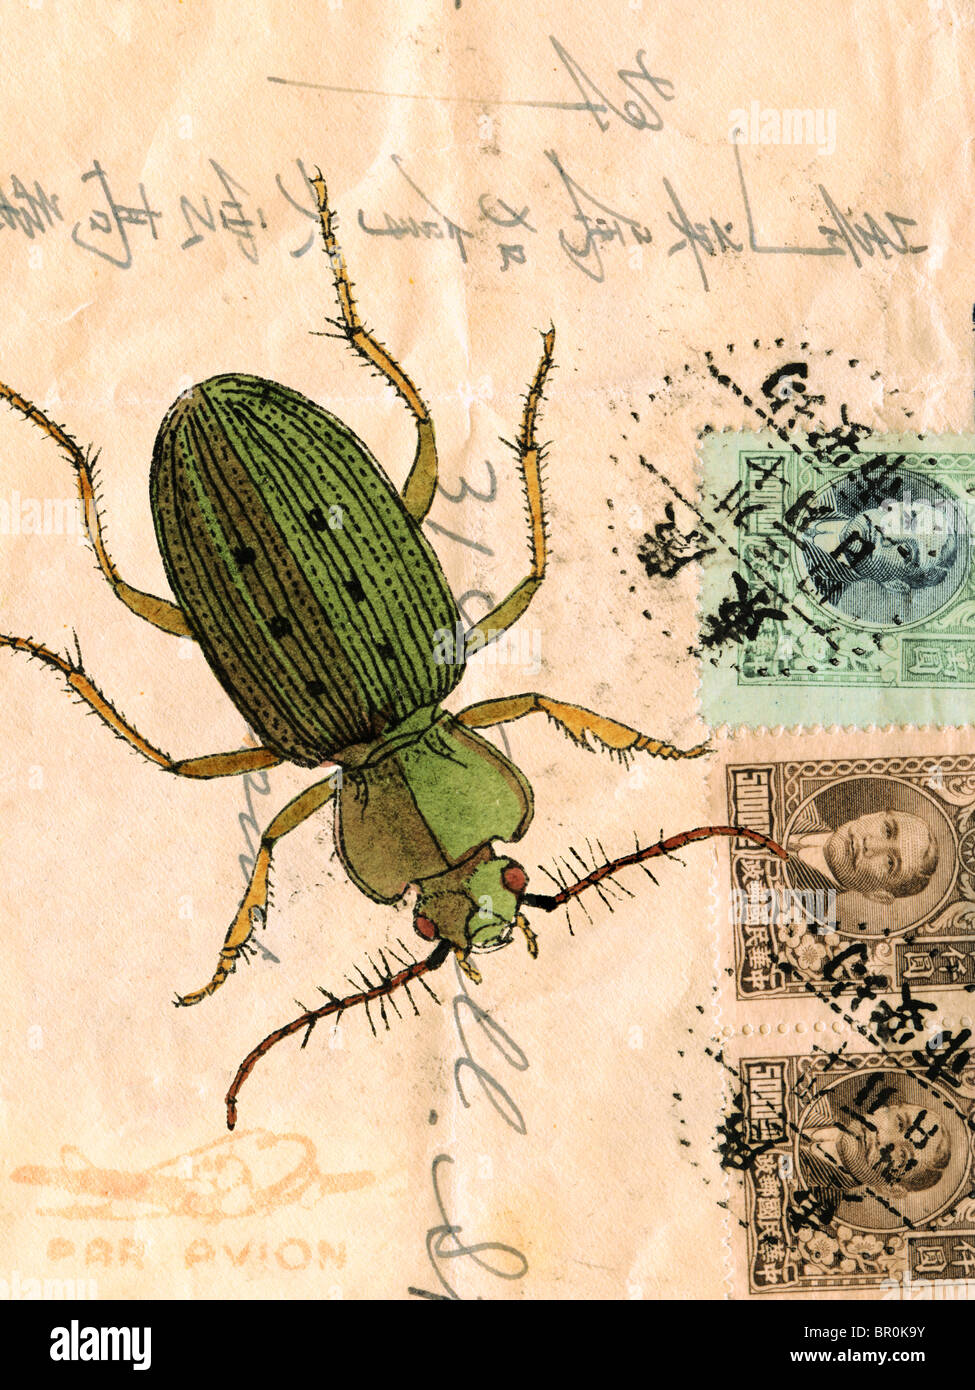 An old envelope with stamps, Chinese and English writing and a beetle Stock Photo